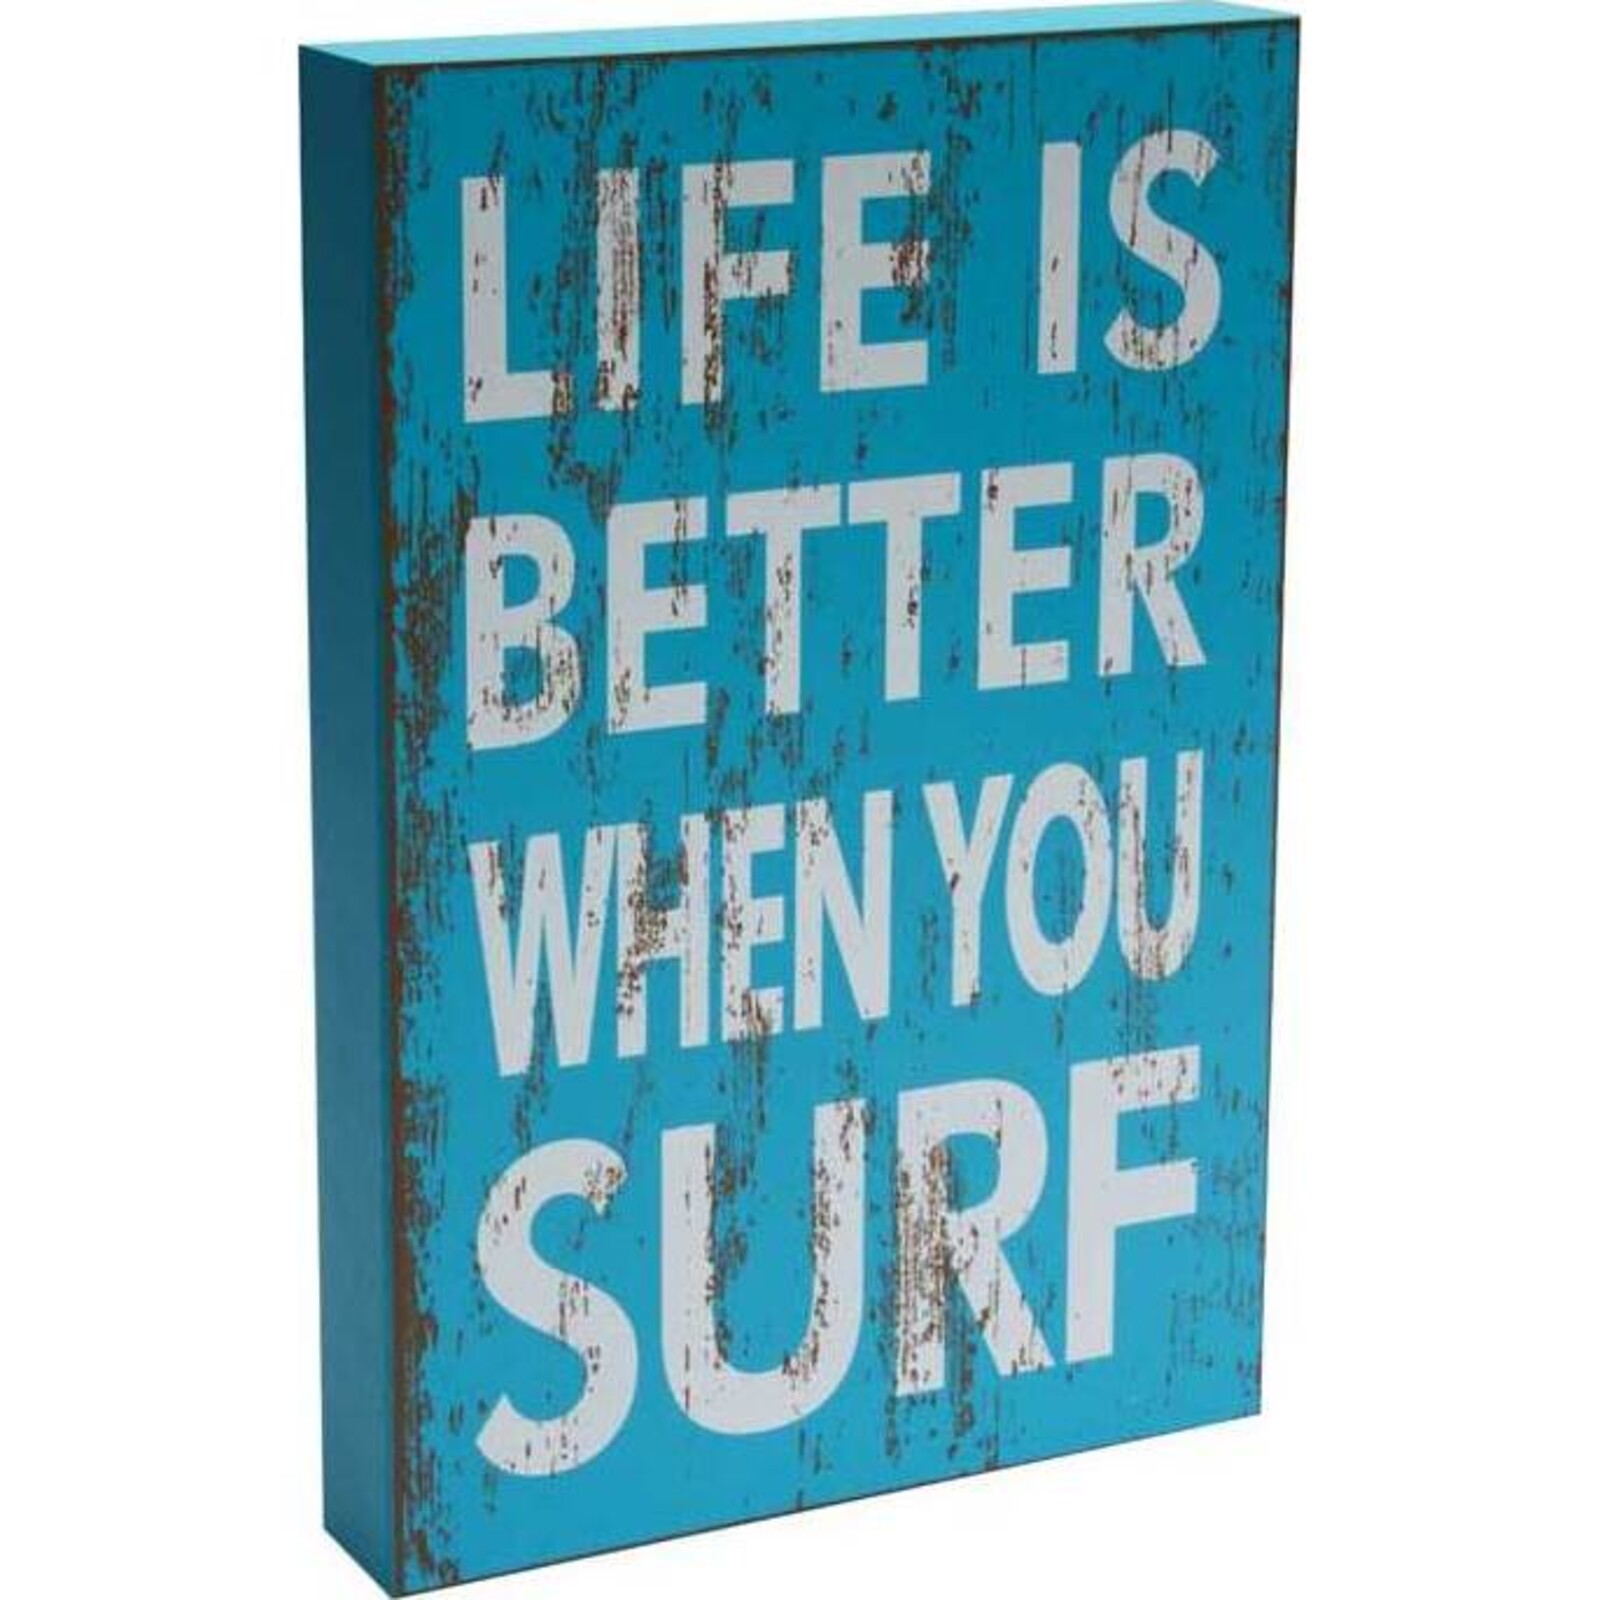 Sign When You Surf